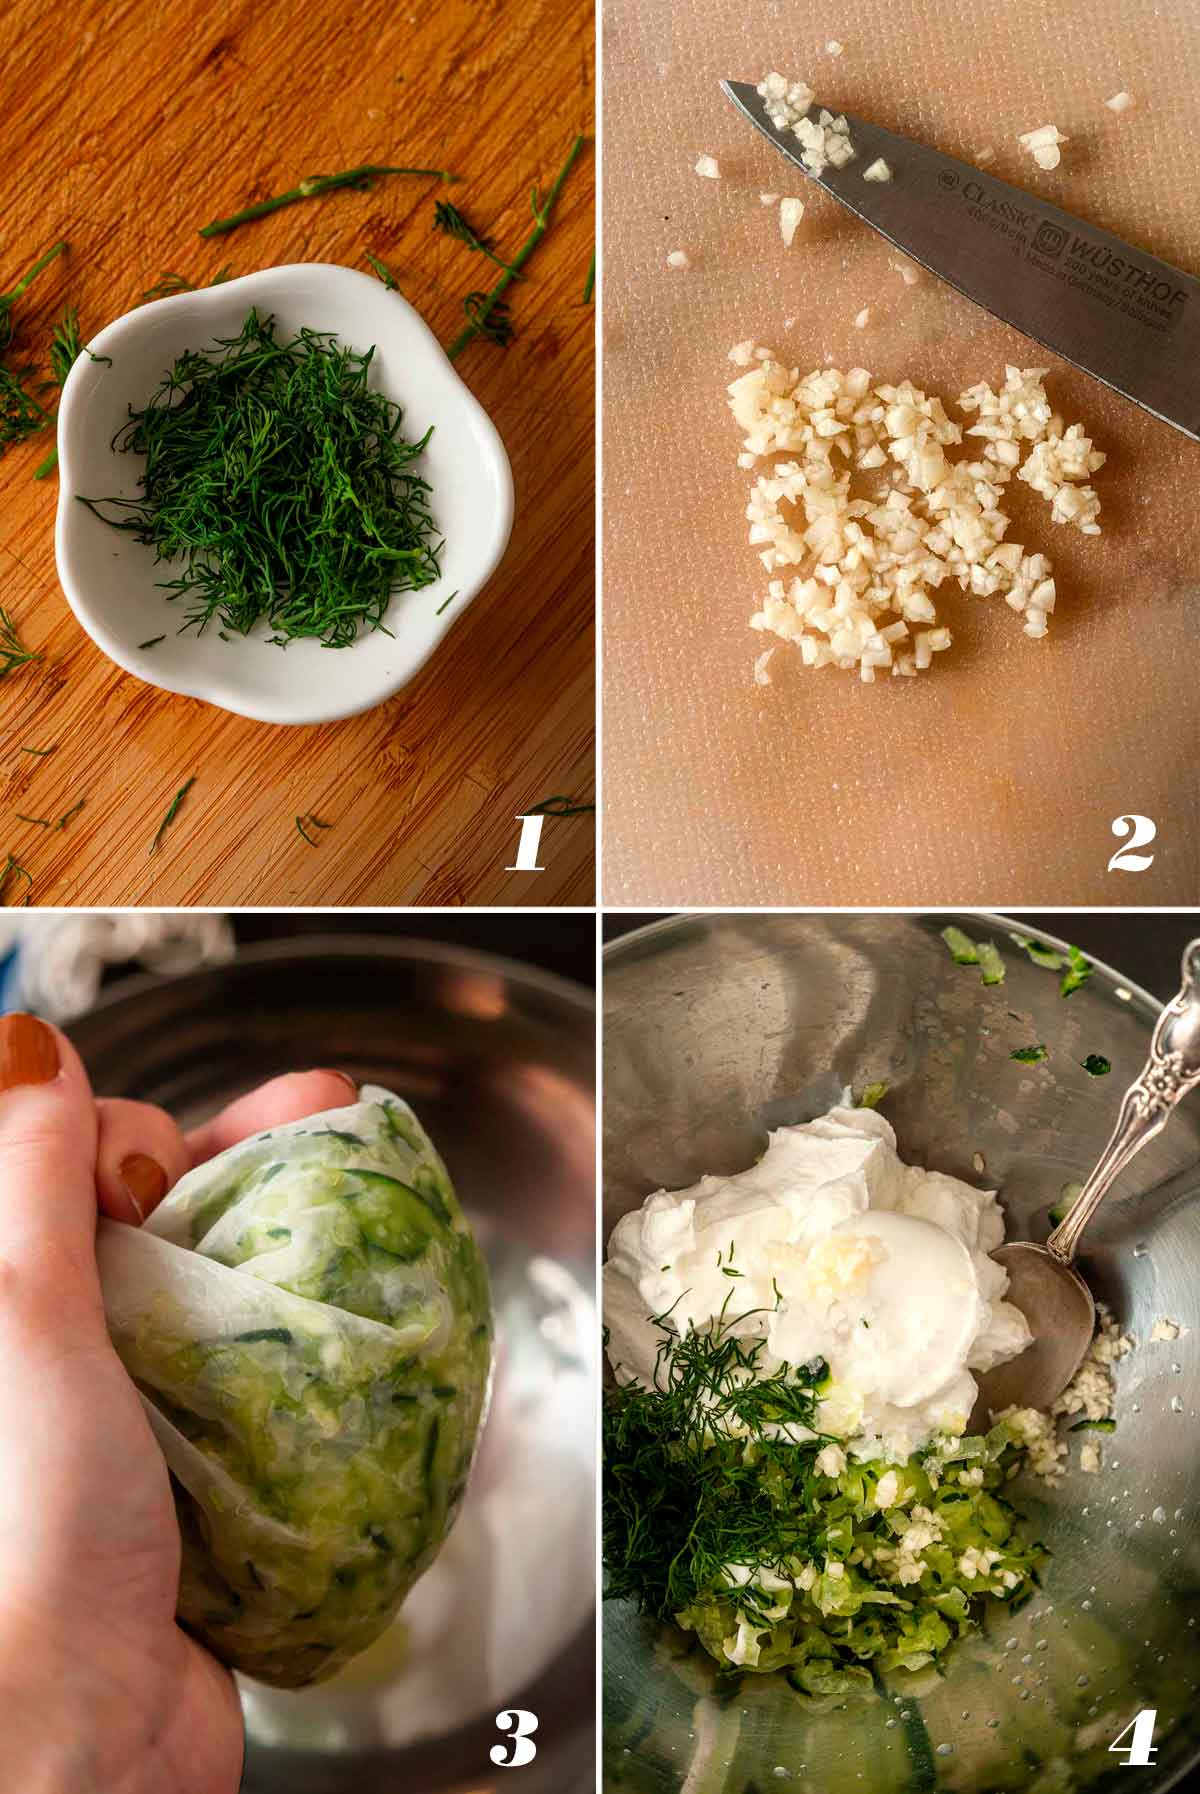 A collage of 4 numbered images showing how to make tzatziki.